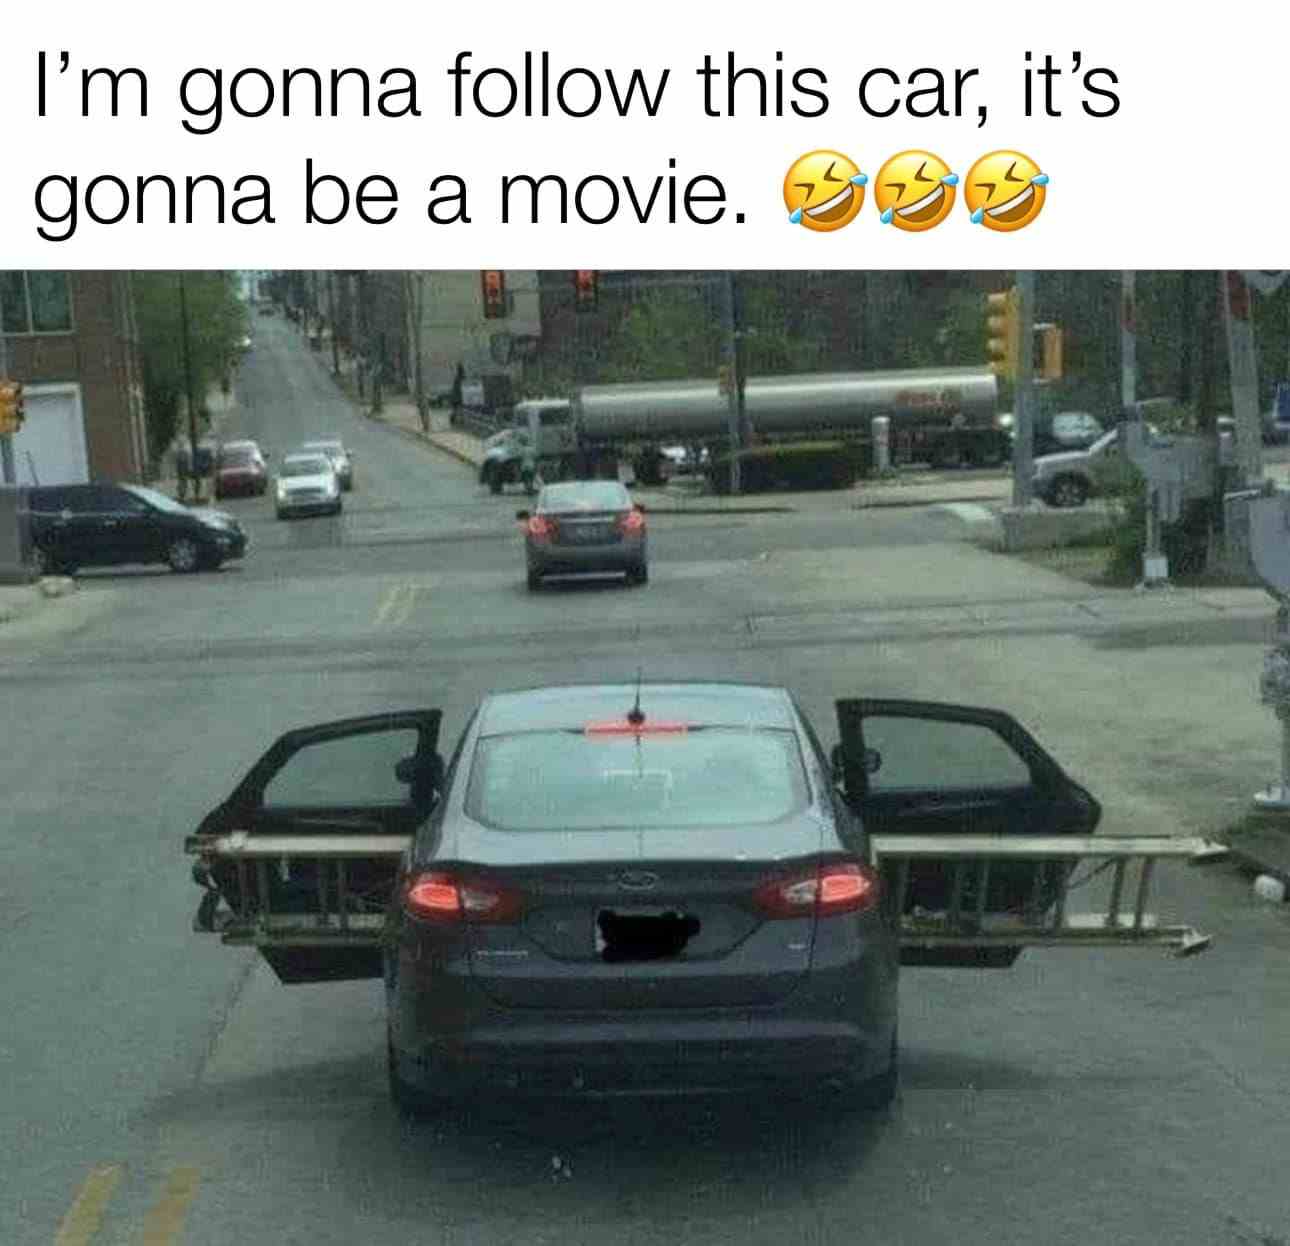 I'm gonna follow this car it's gonna be a movie